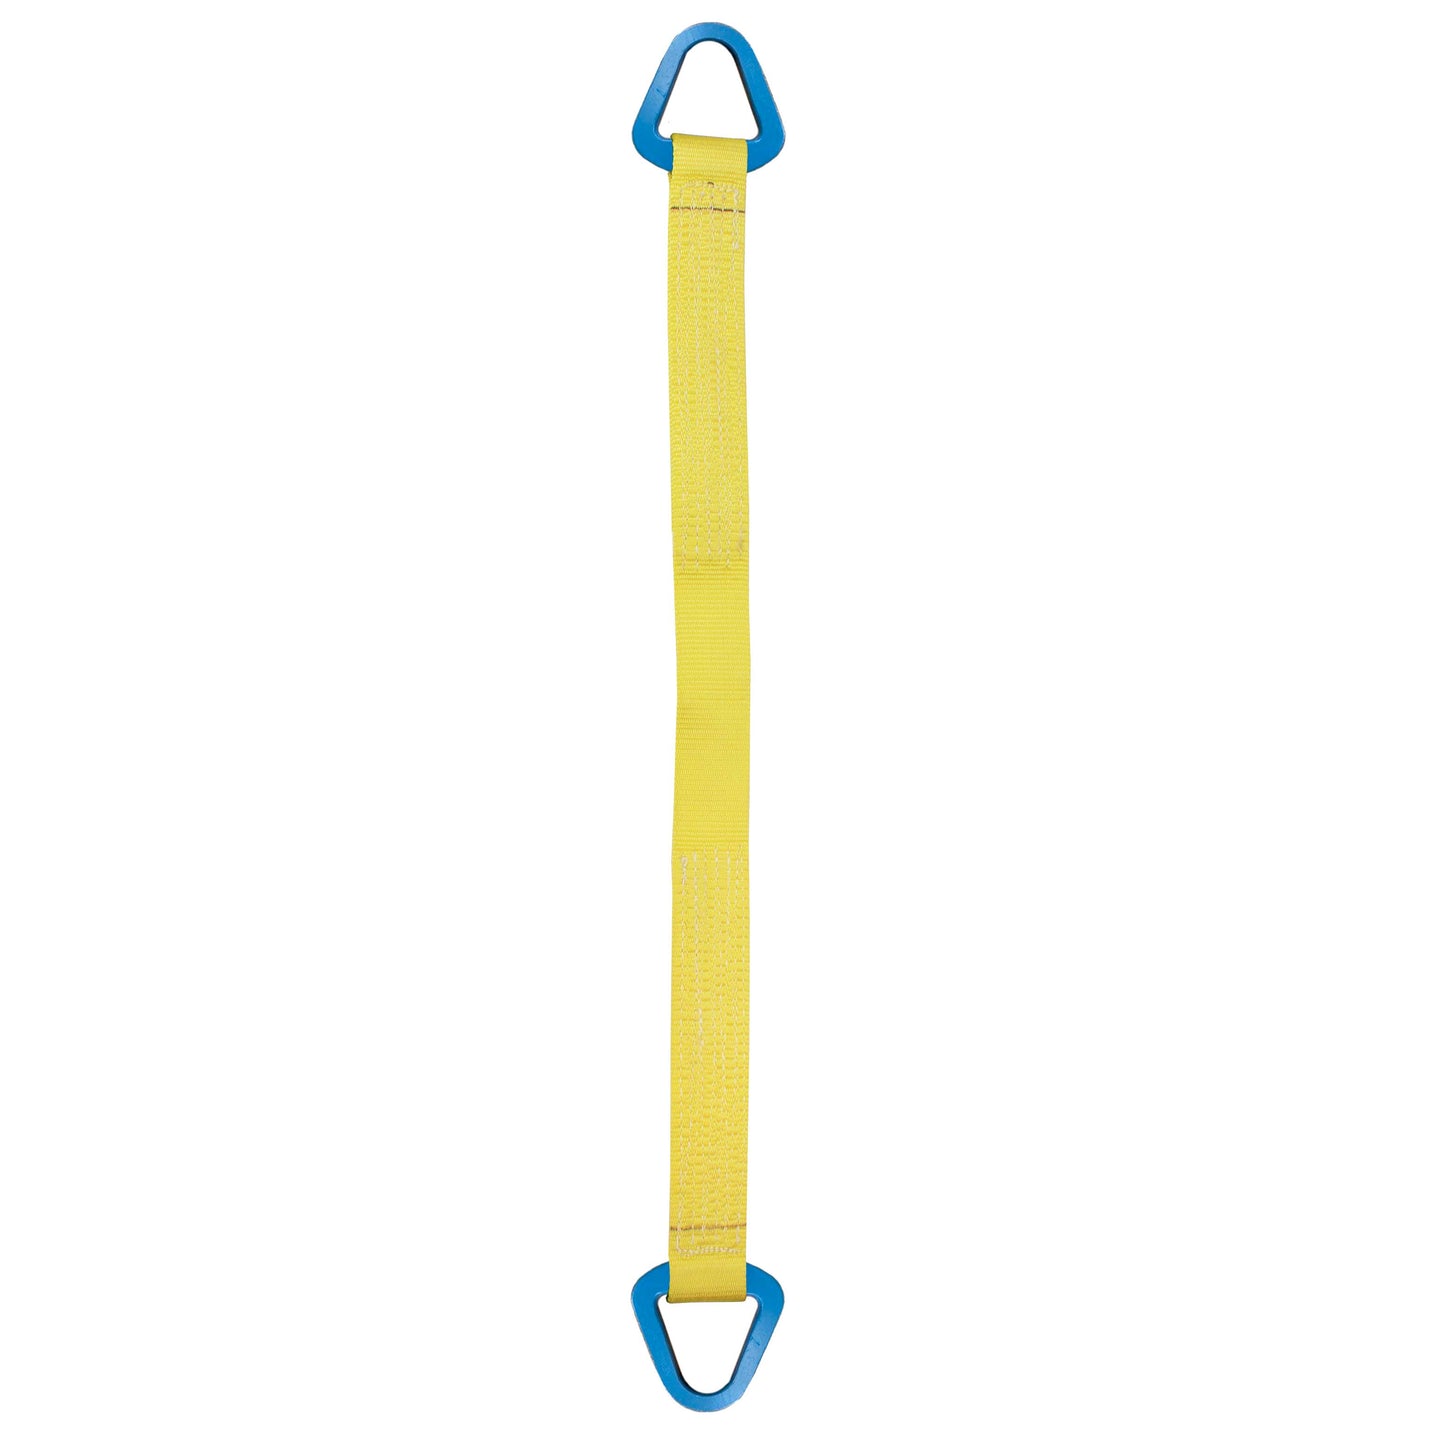 Nylon Lifting Sling Triangle 2 inch x 20 foot 1ply image 1 of 2